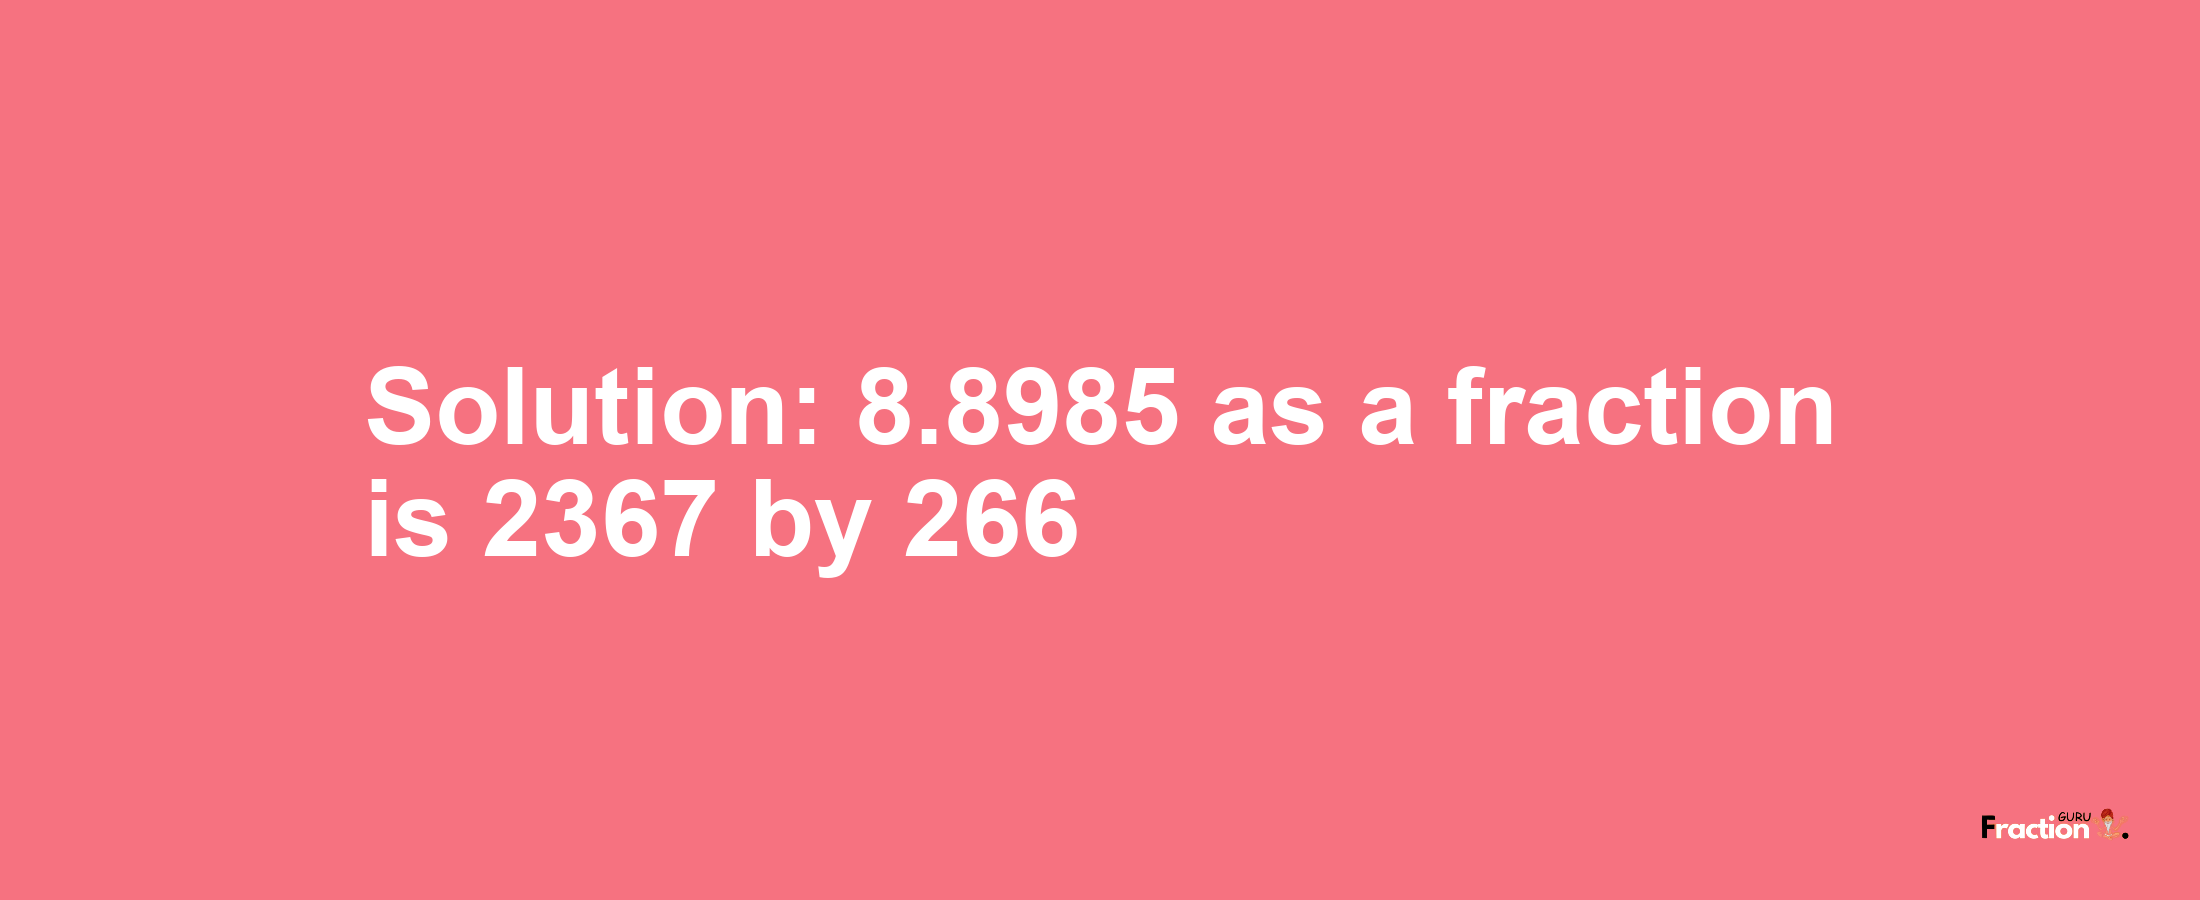 Solution:8.8985 as a fraction is 2367/266